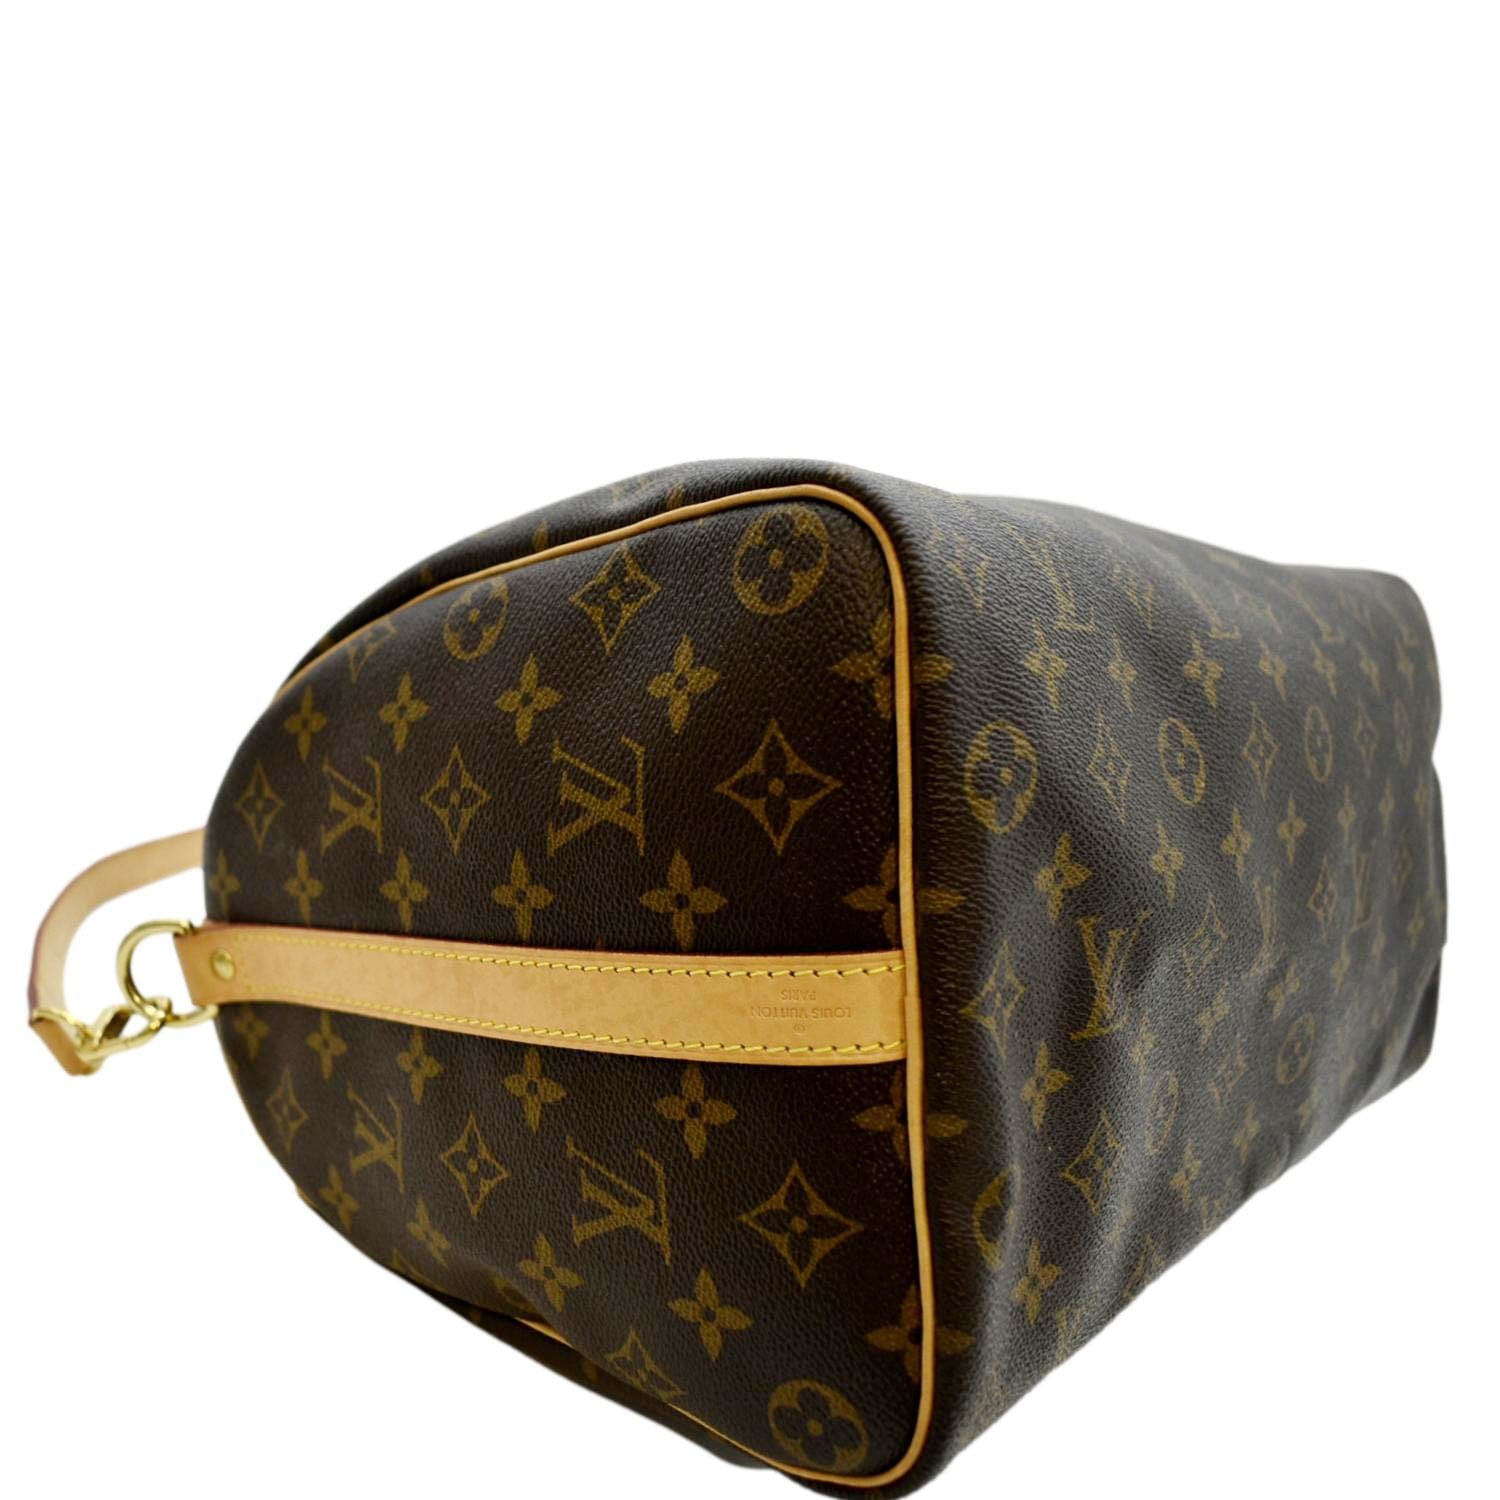 LOUIS VUITTON Speedy Bandouliere 35 2way Shoulder Bag N41372｜Product  Code：2101213884048｜BRAND OFF Online Store